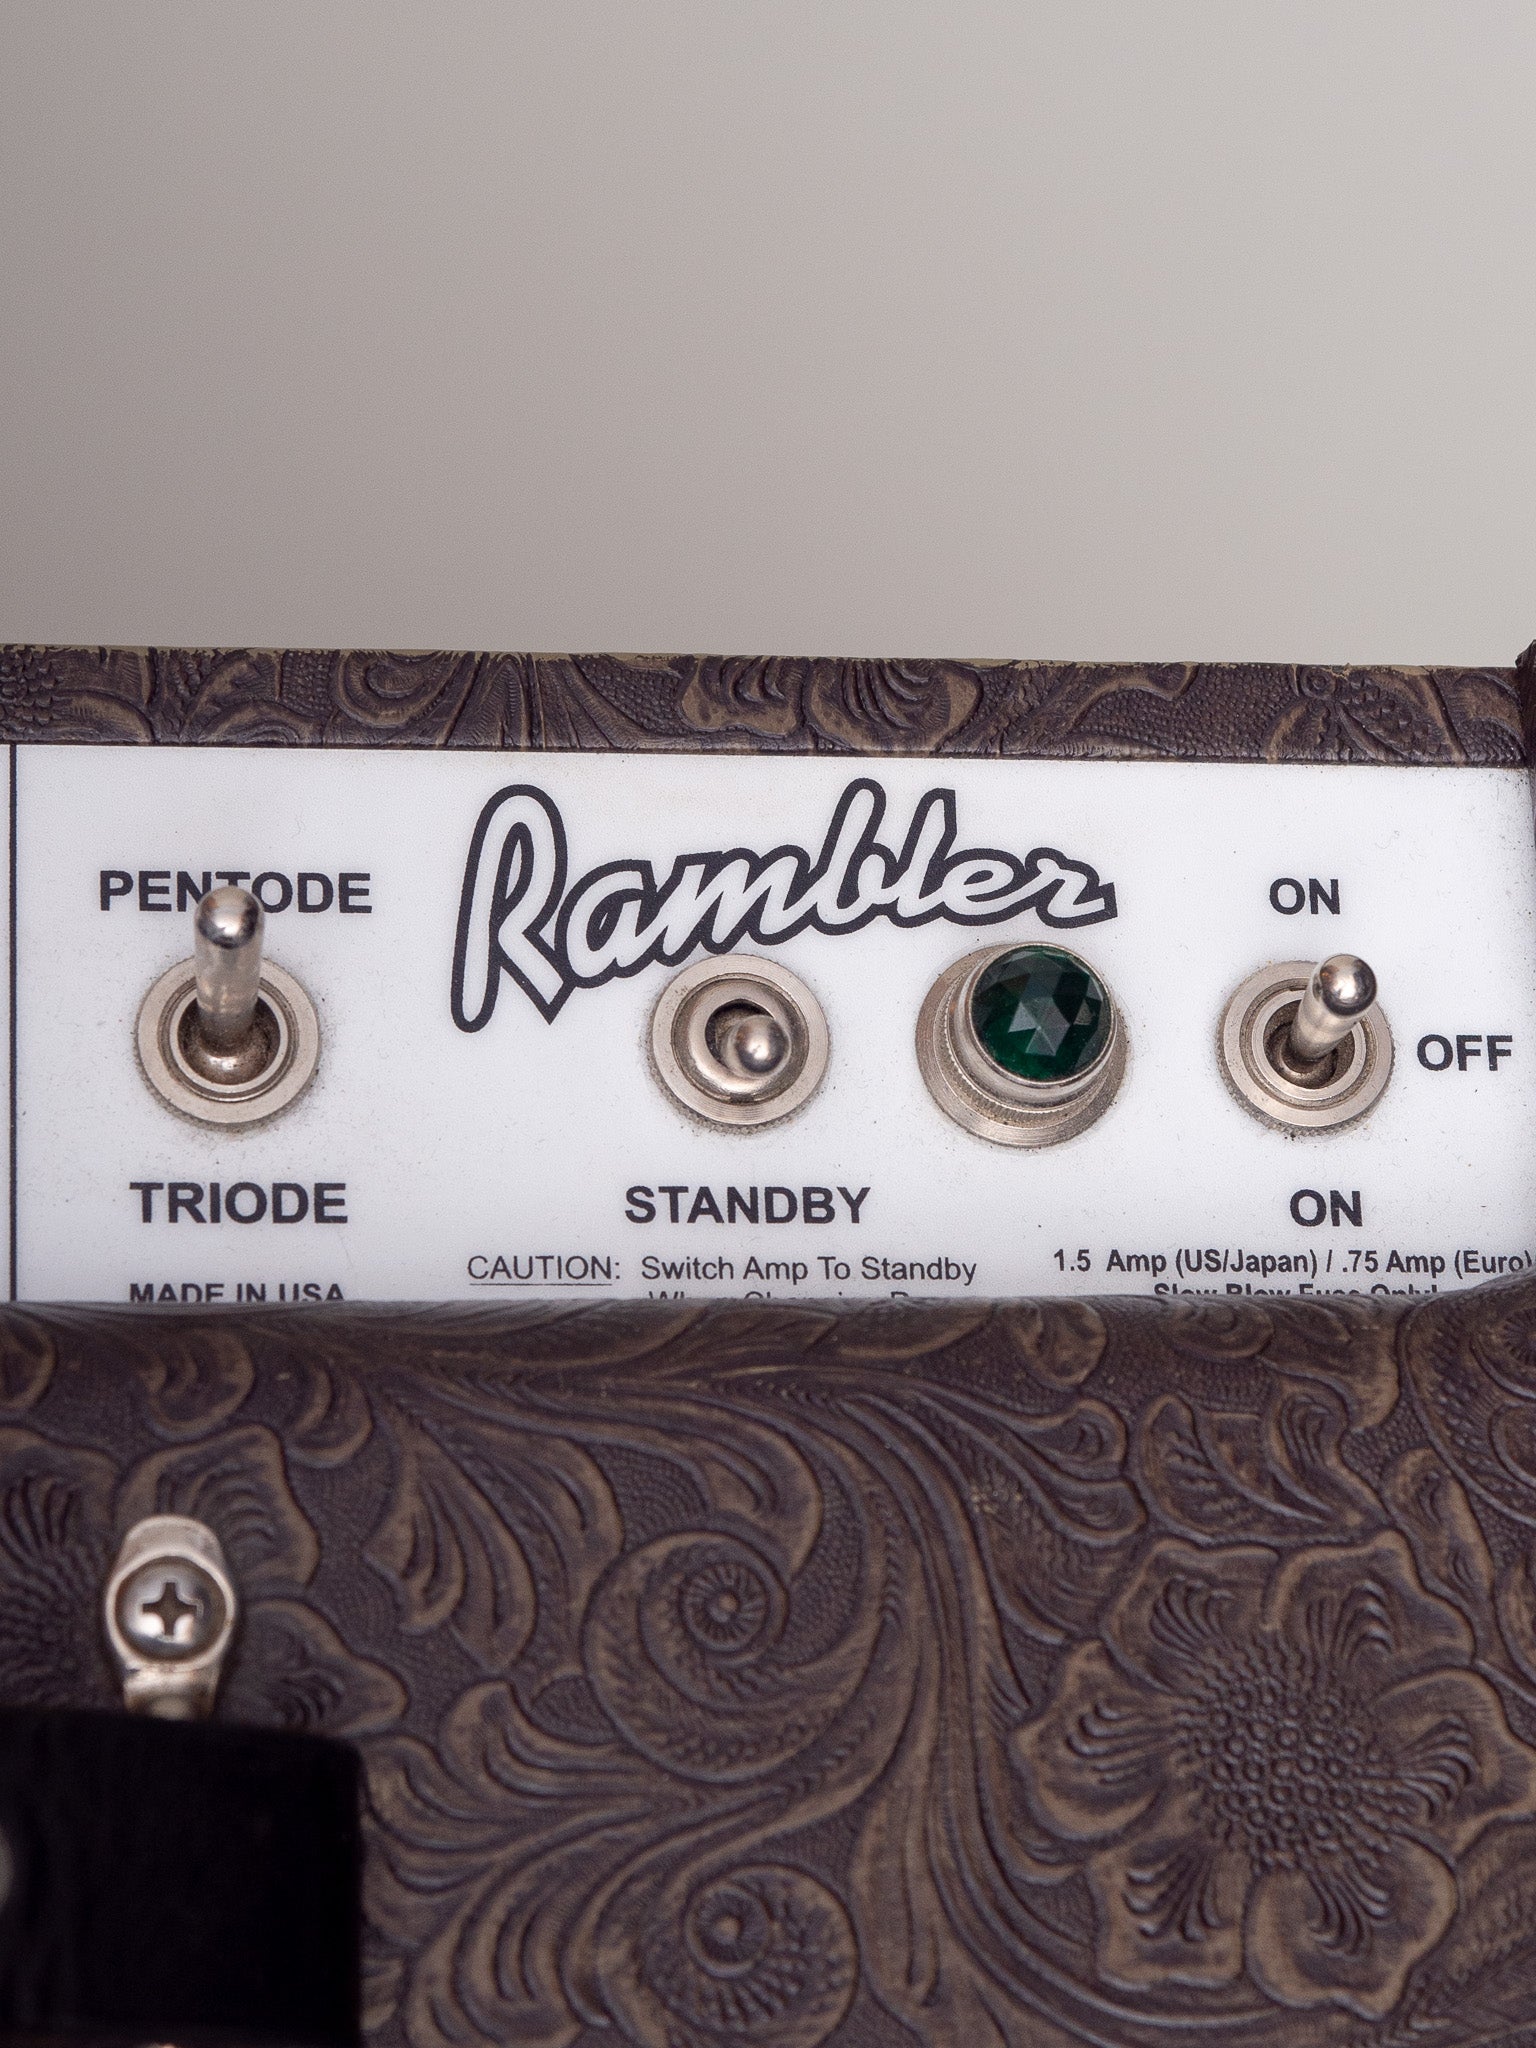 Used Carr Rambler Electric Guitar Amplifier Combo Pentode/Triode, Standby, On/Off Control Switches